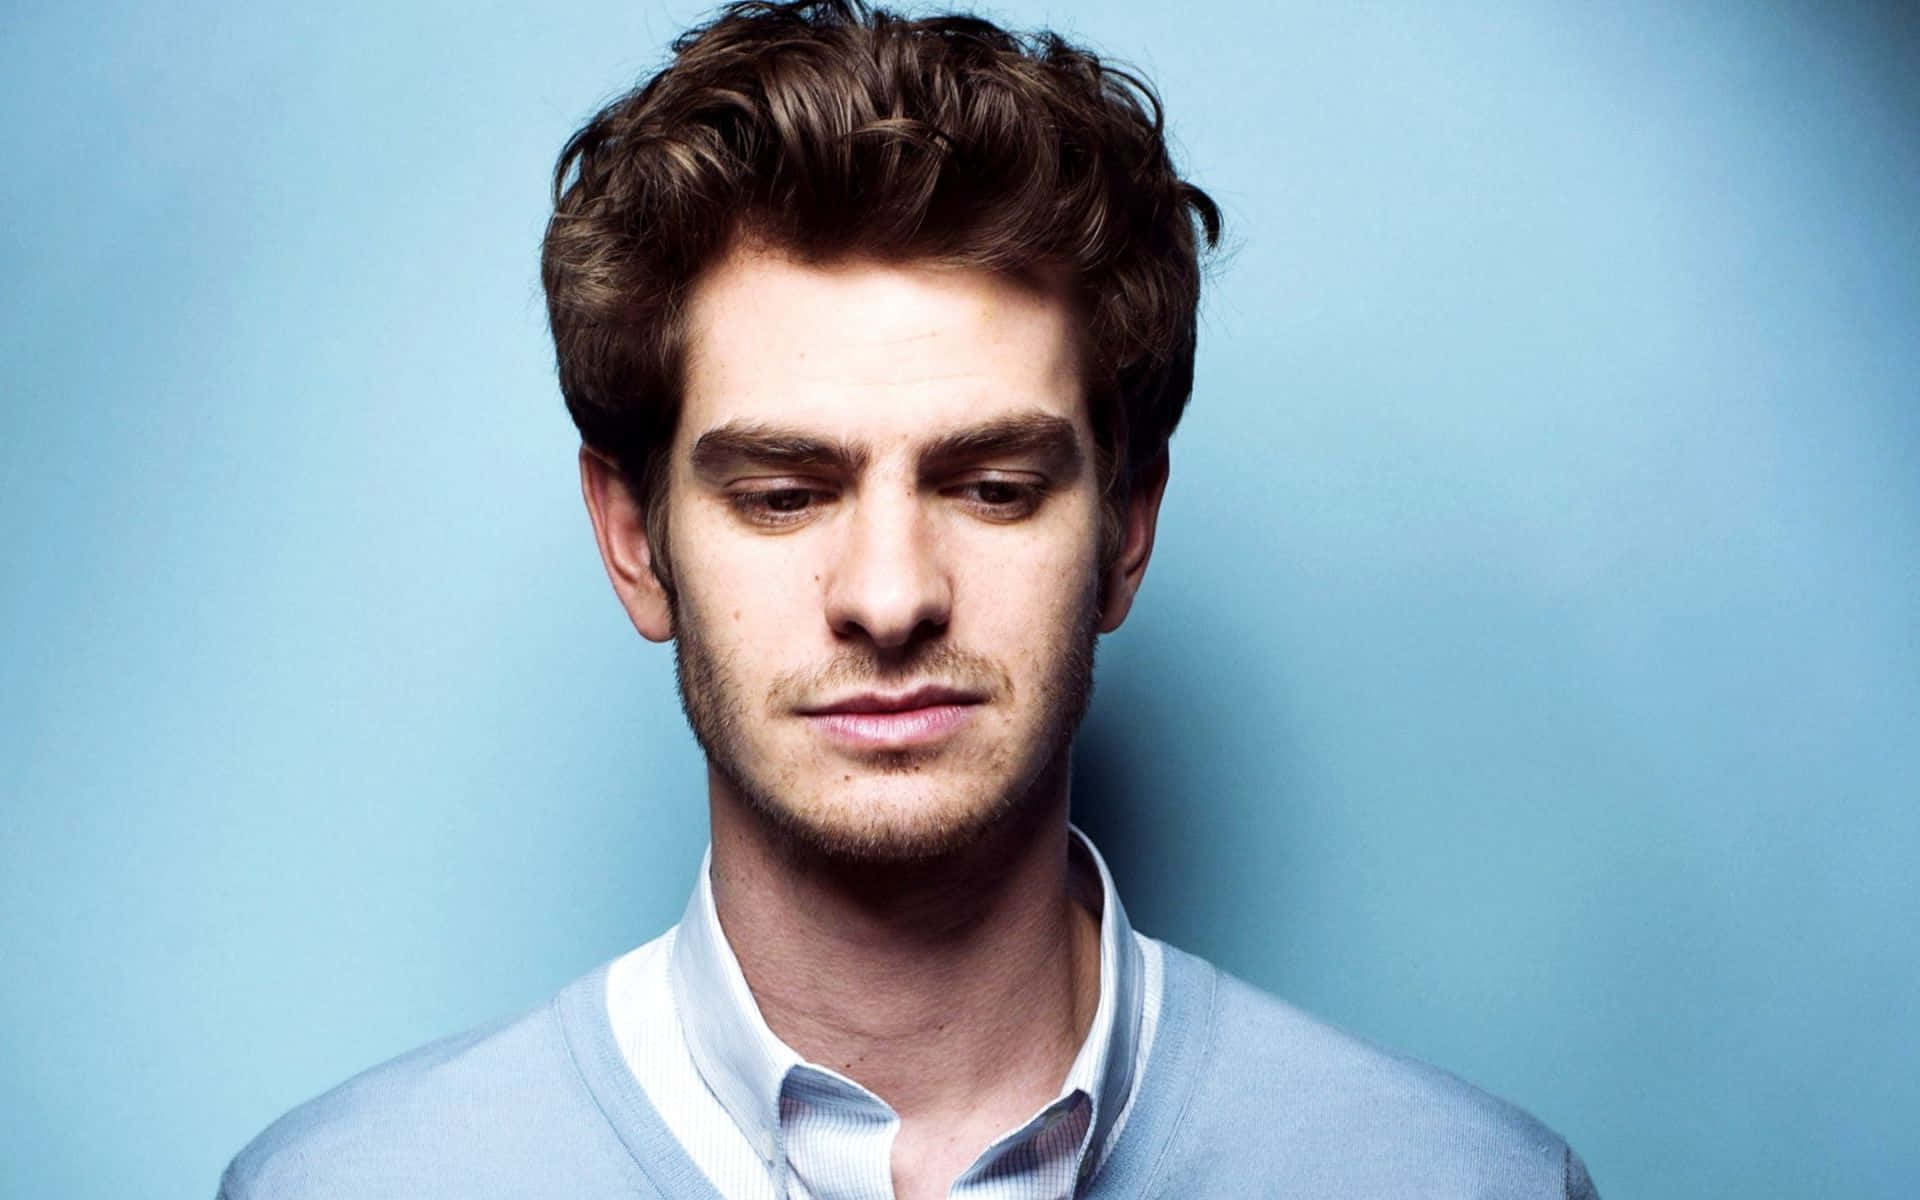 Andrew Garfield sports a casual look.